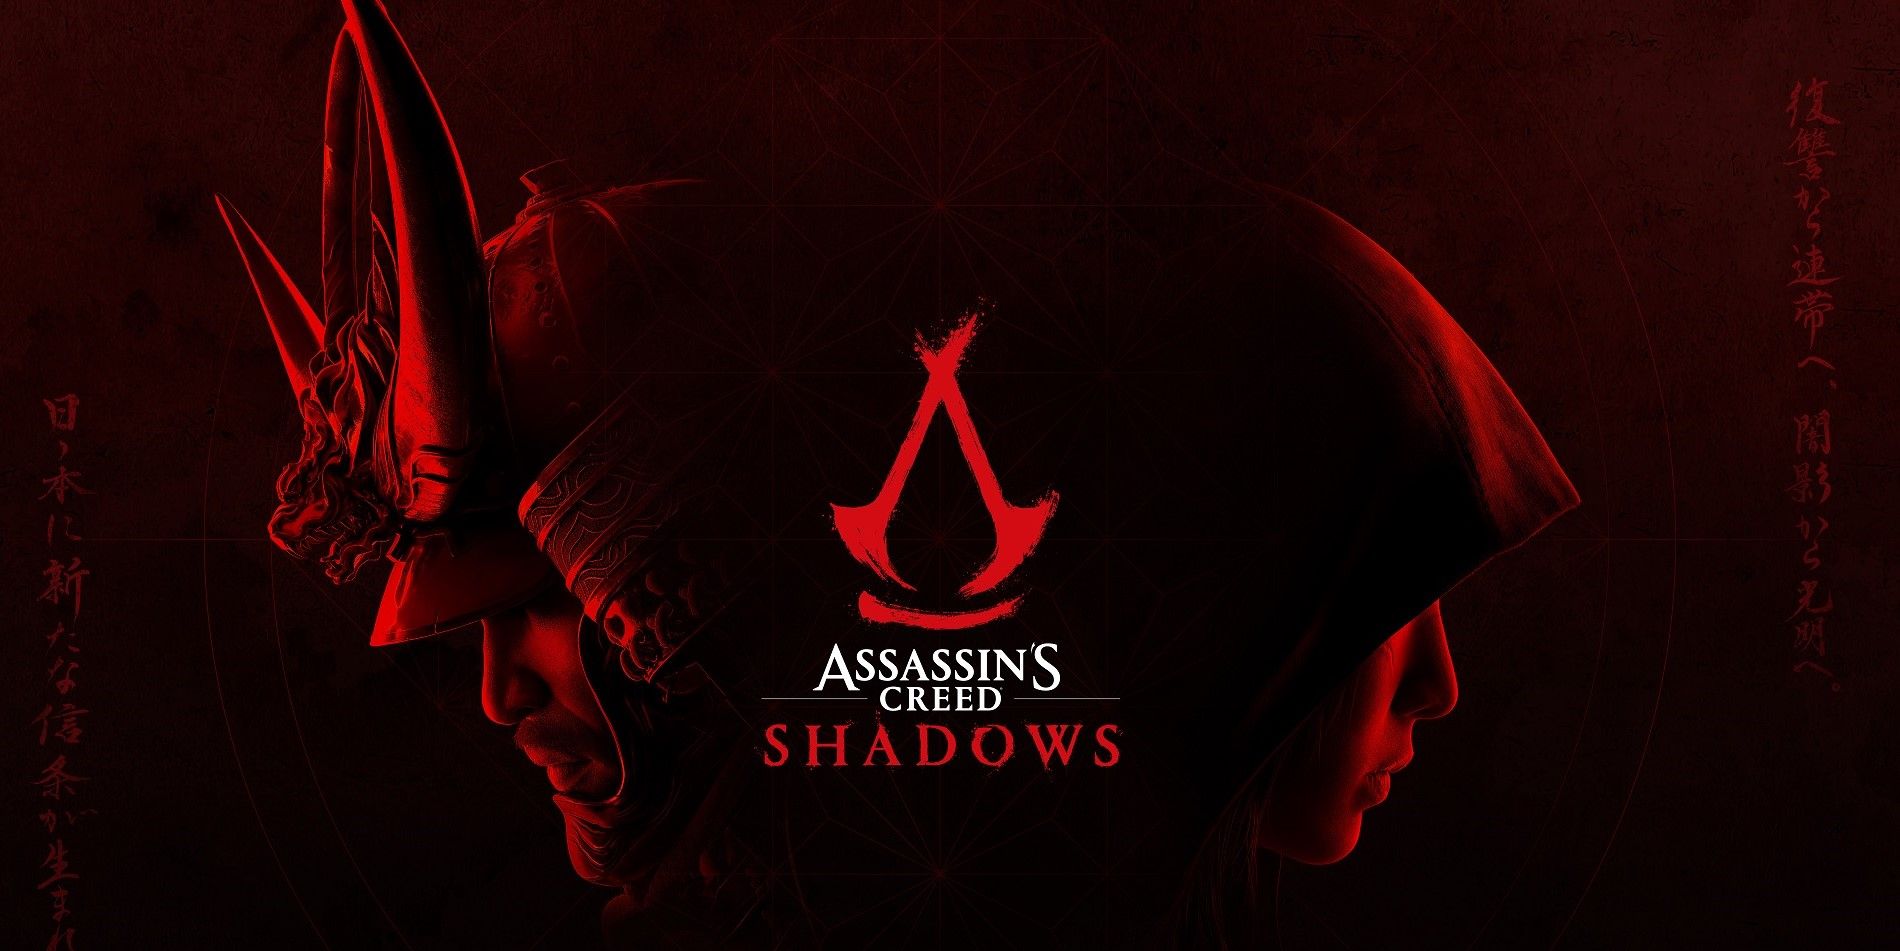 assassins-creed-shadows-feature-image